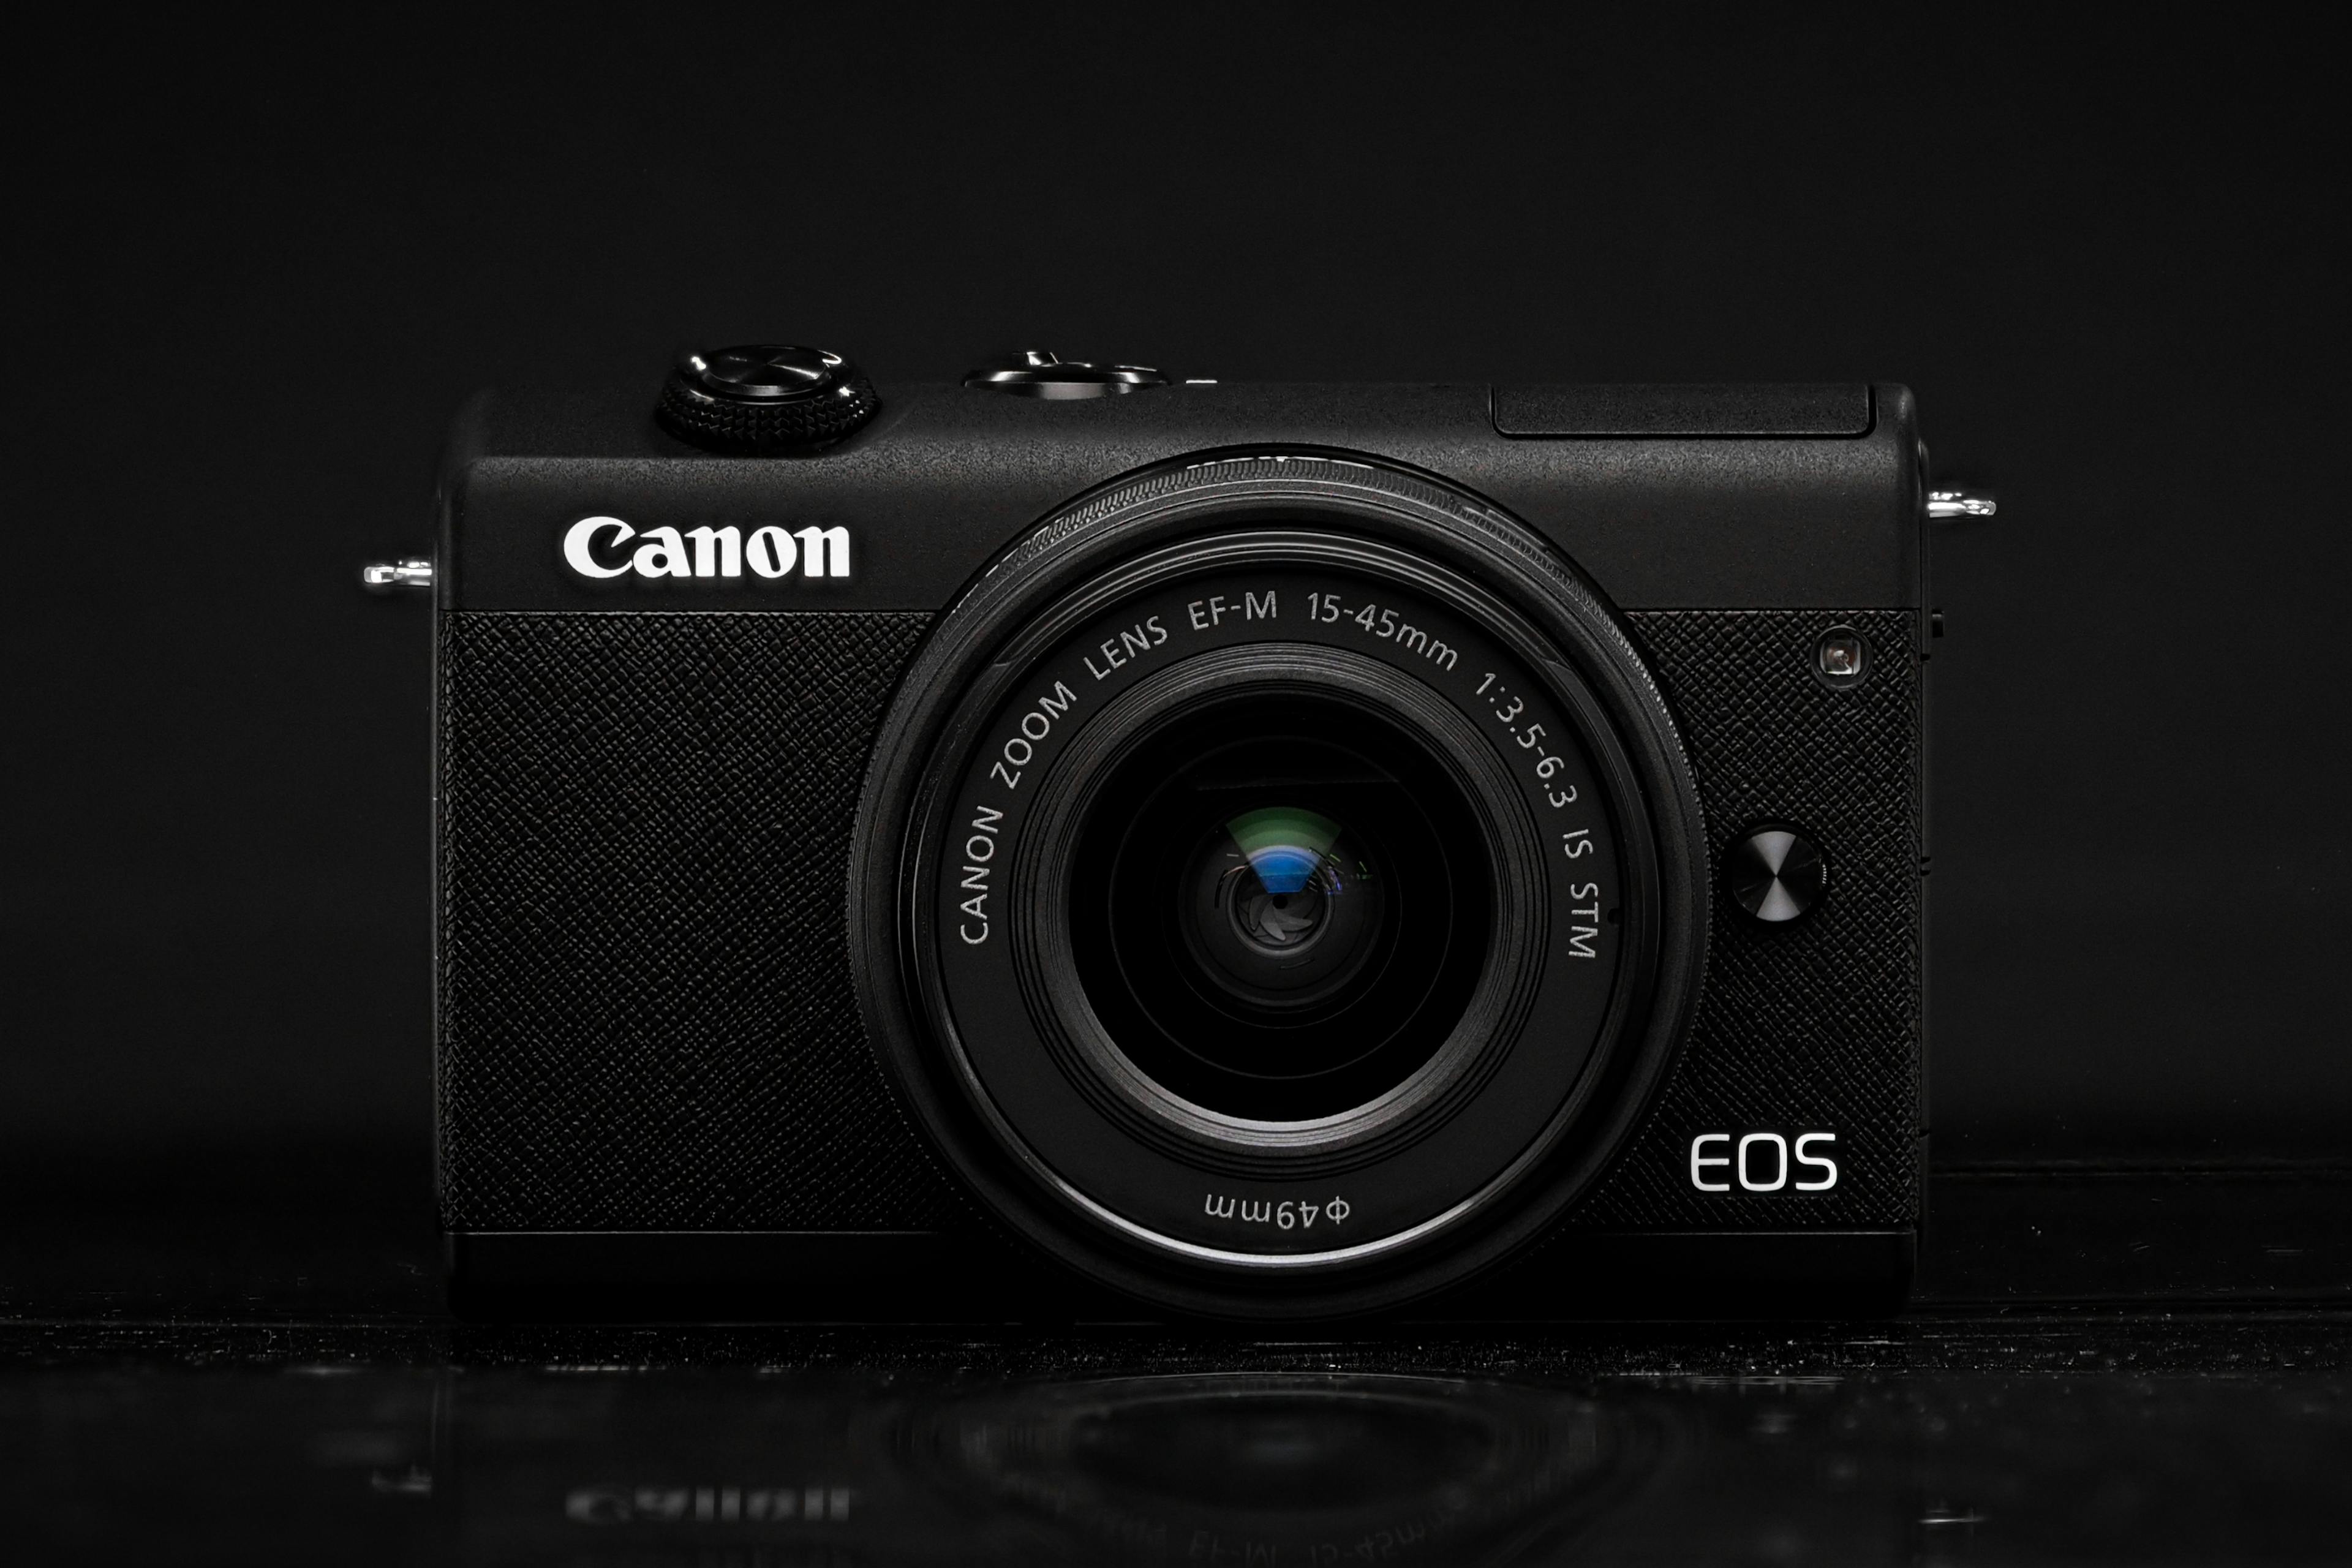 Cover Image for Exploring the Canon EOS M200: A Compact and Affordable Mirrorless Camera